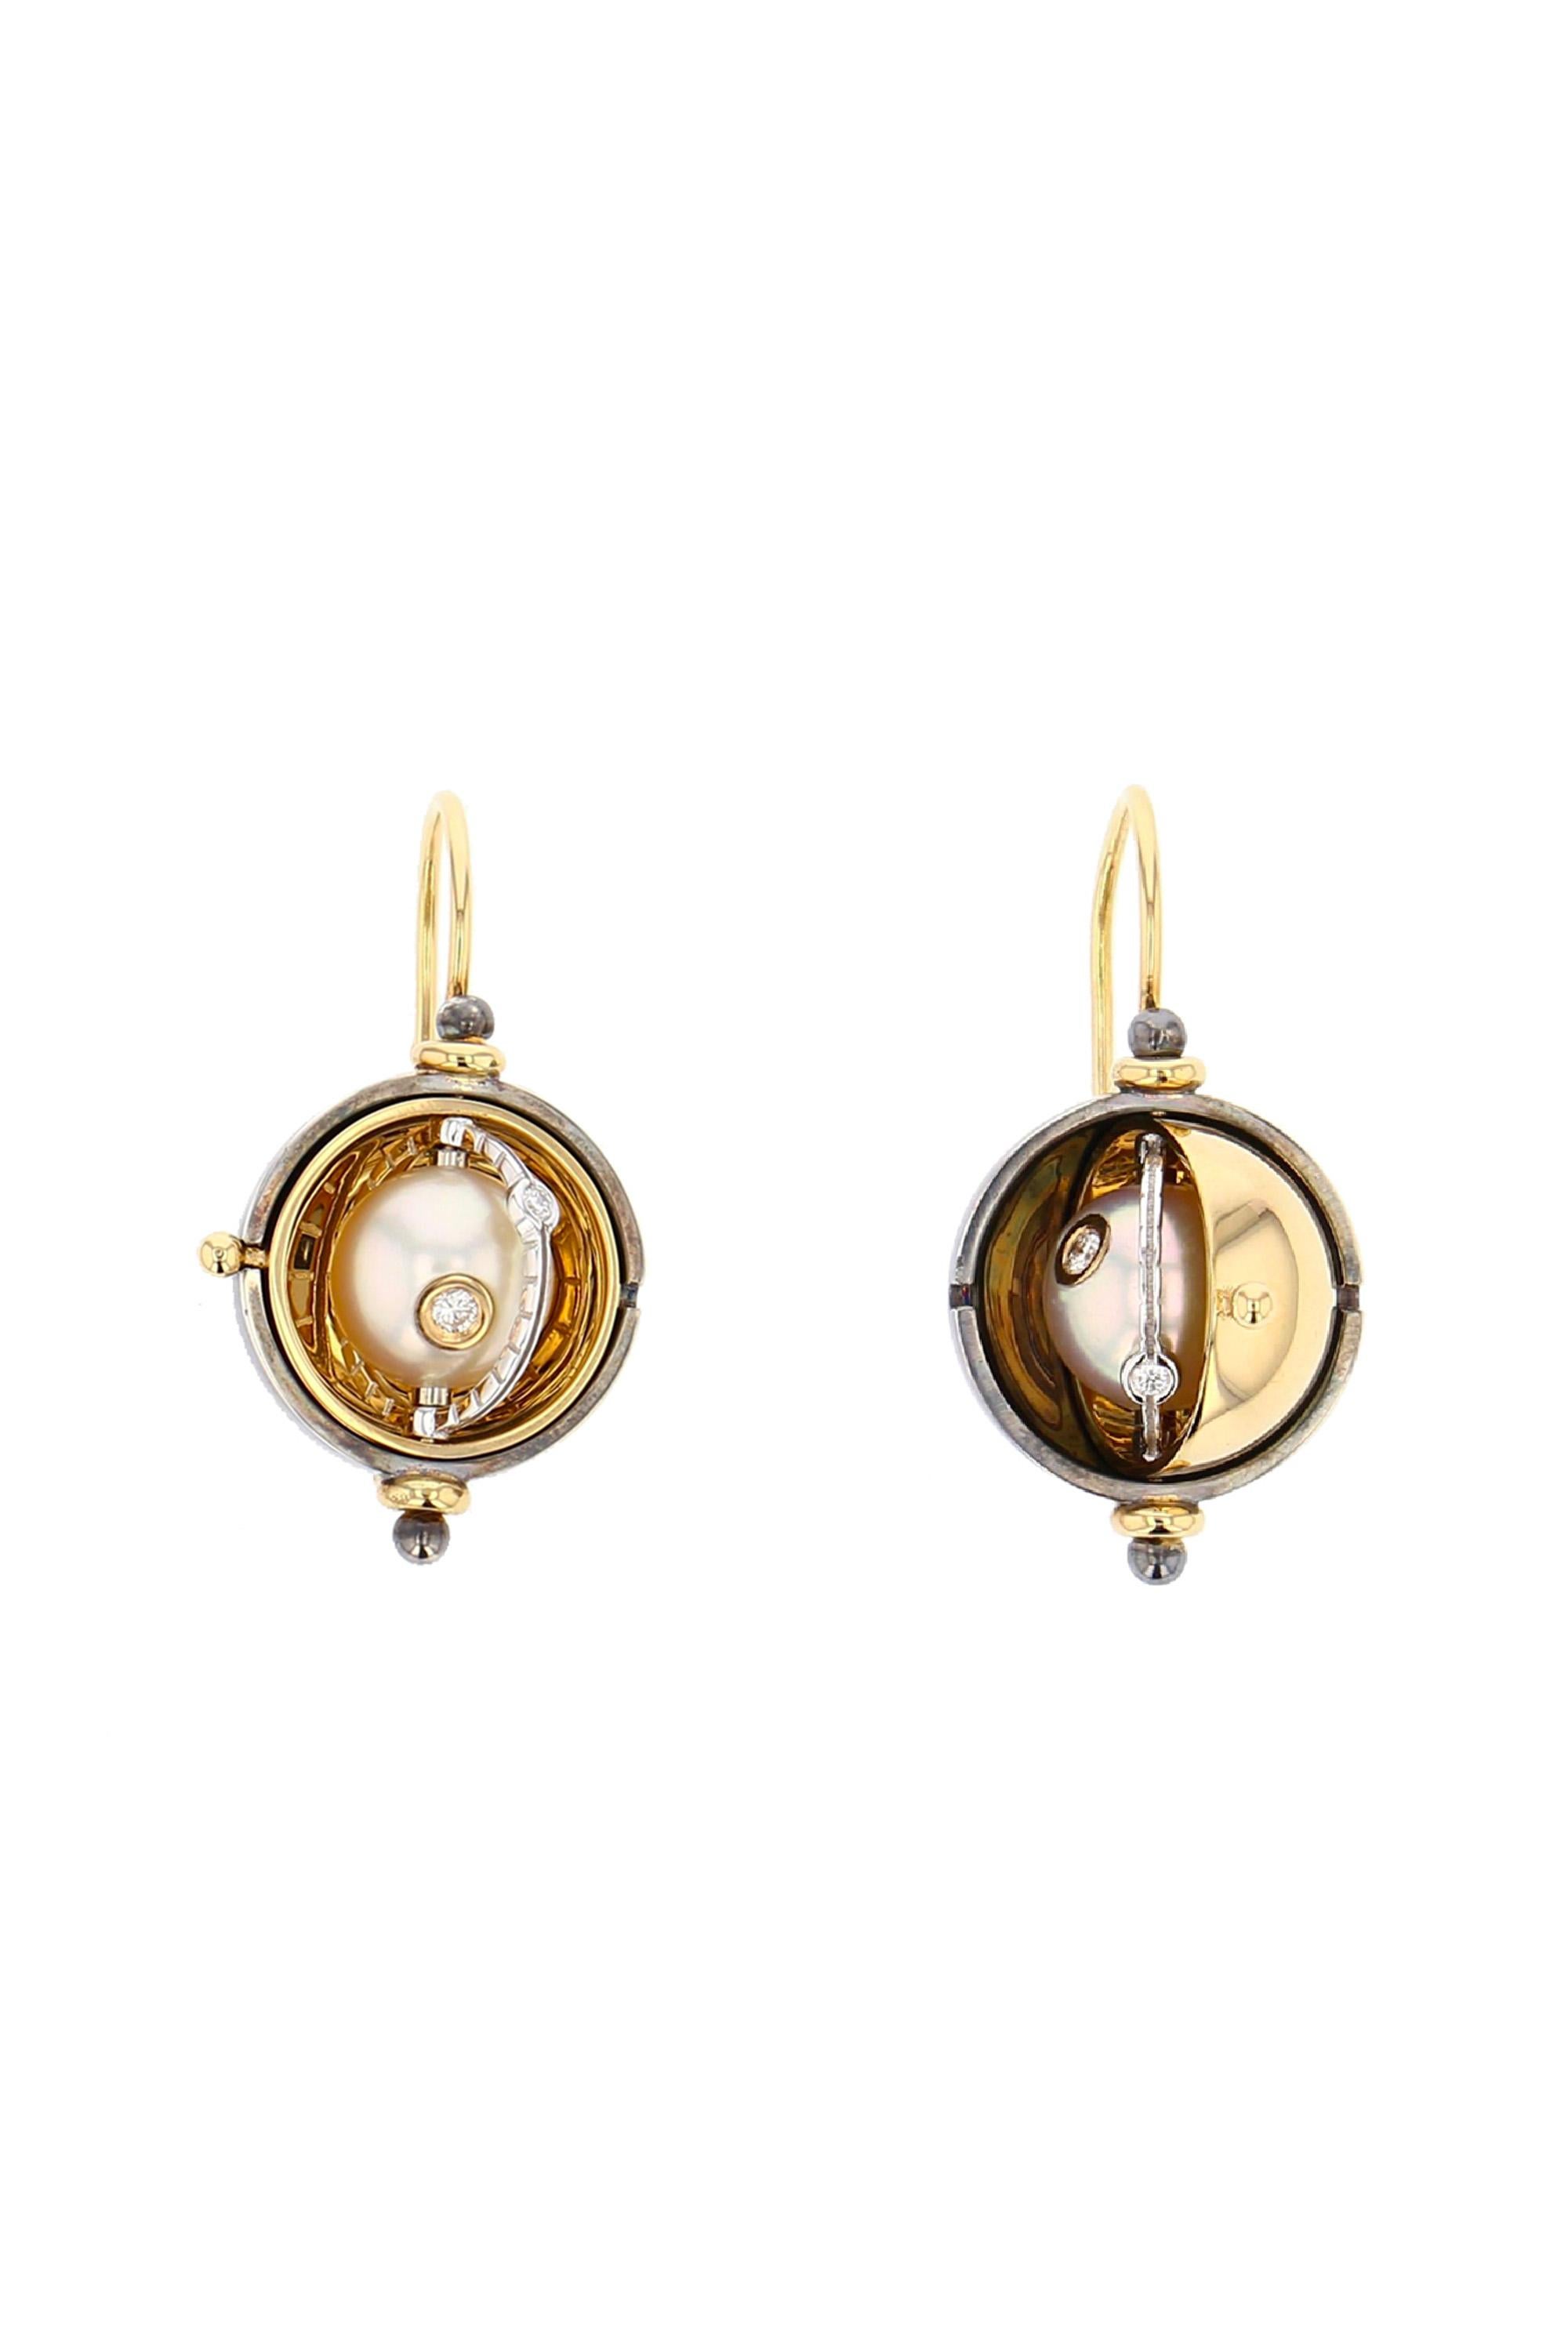 Gold and distressed silver earrings. Rotating sphere revealing an akoya pearl encircled by a white gold ring  set with a diamond.

Details:
Akoya pearls 
4 Diamonds: 0.09 cts
18k Yellow Gold: 12 g
Distressed Silver: 6 g
Made in France
